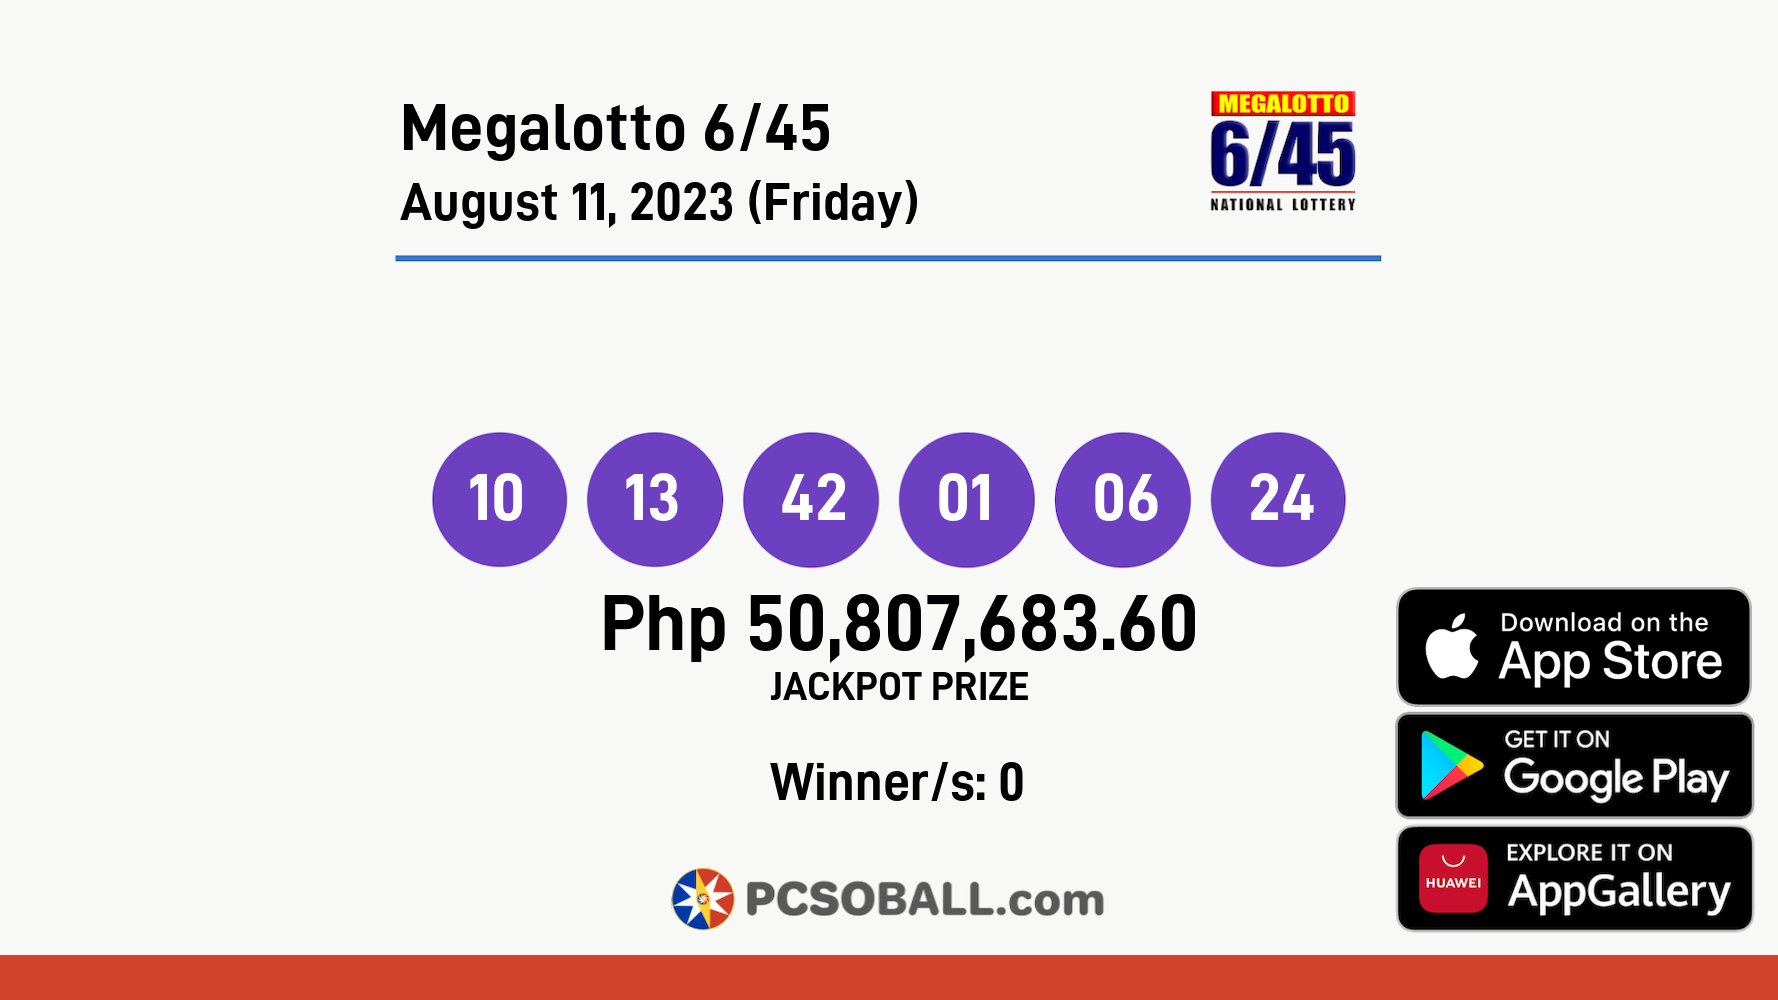 Megalotto 6/45 August 11, 2023 (Friday) Result